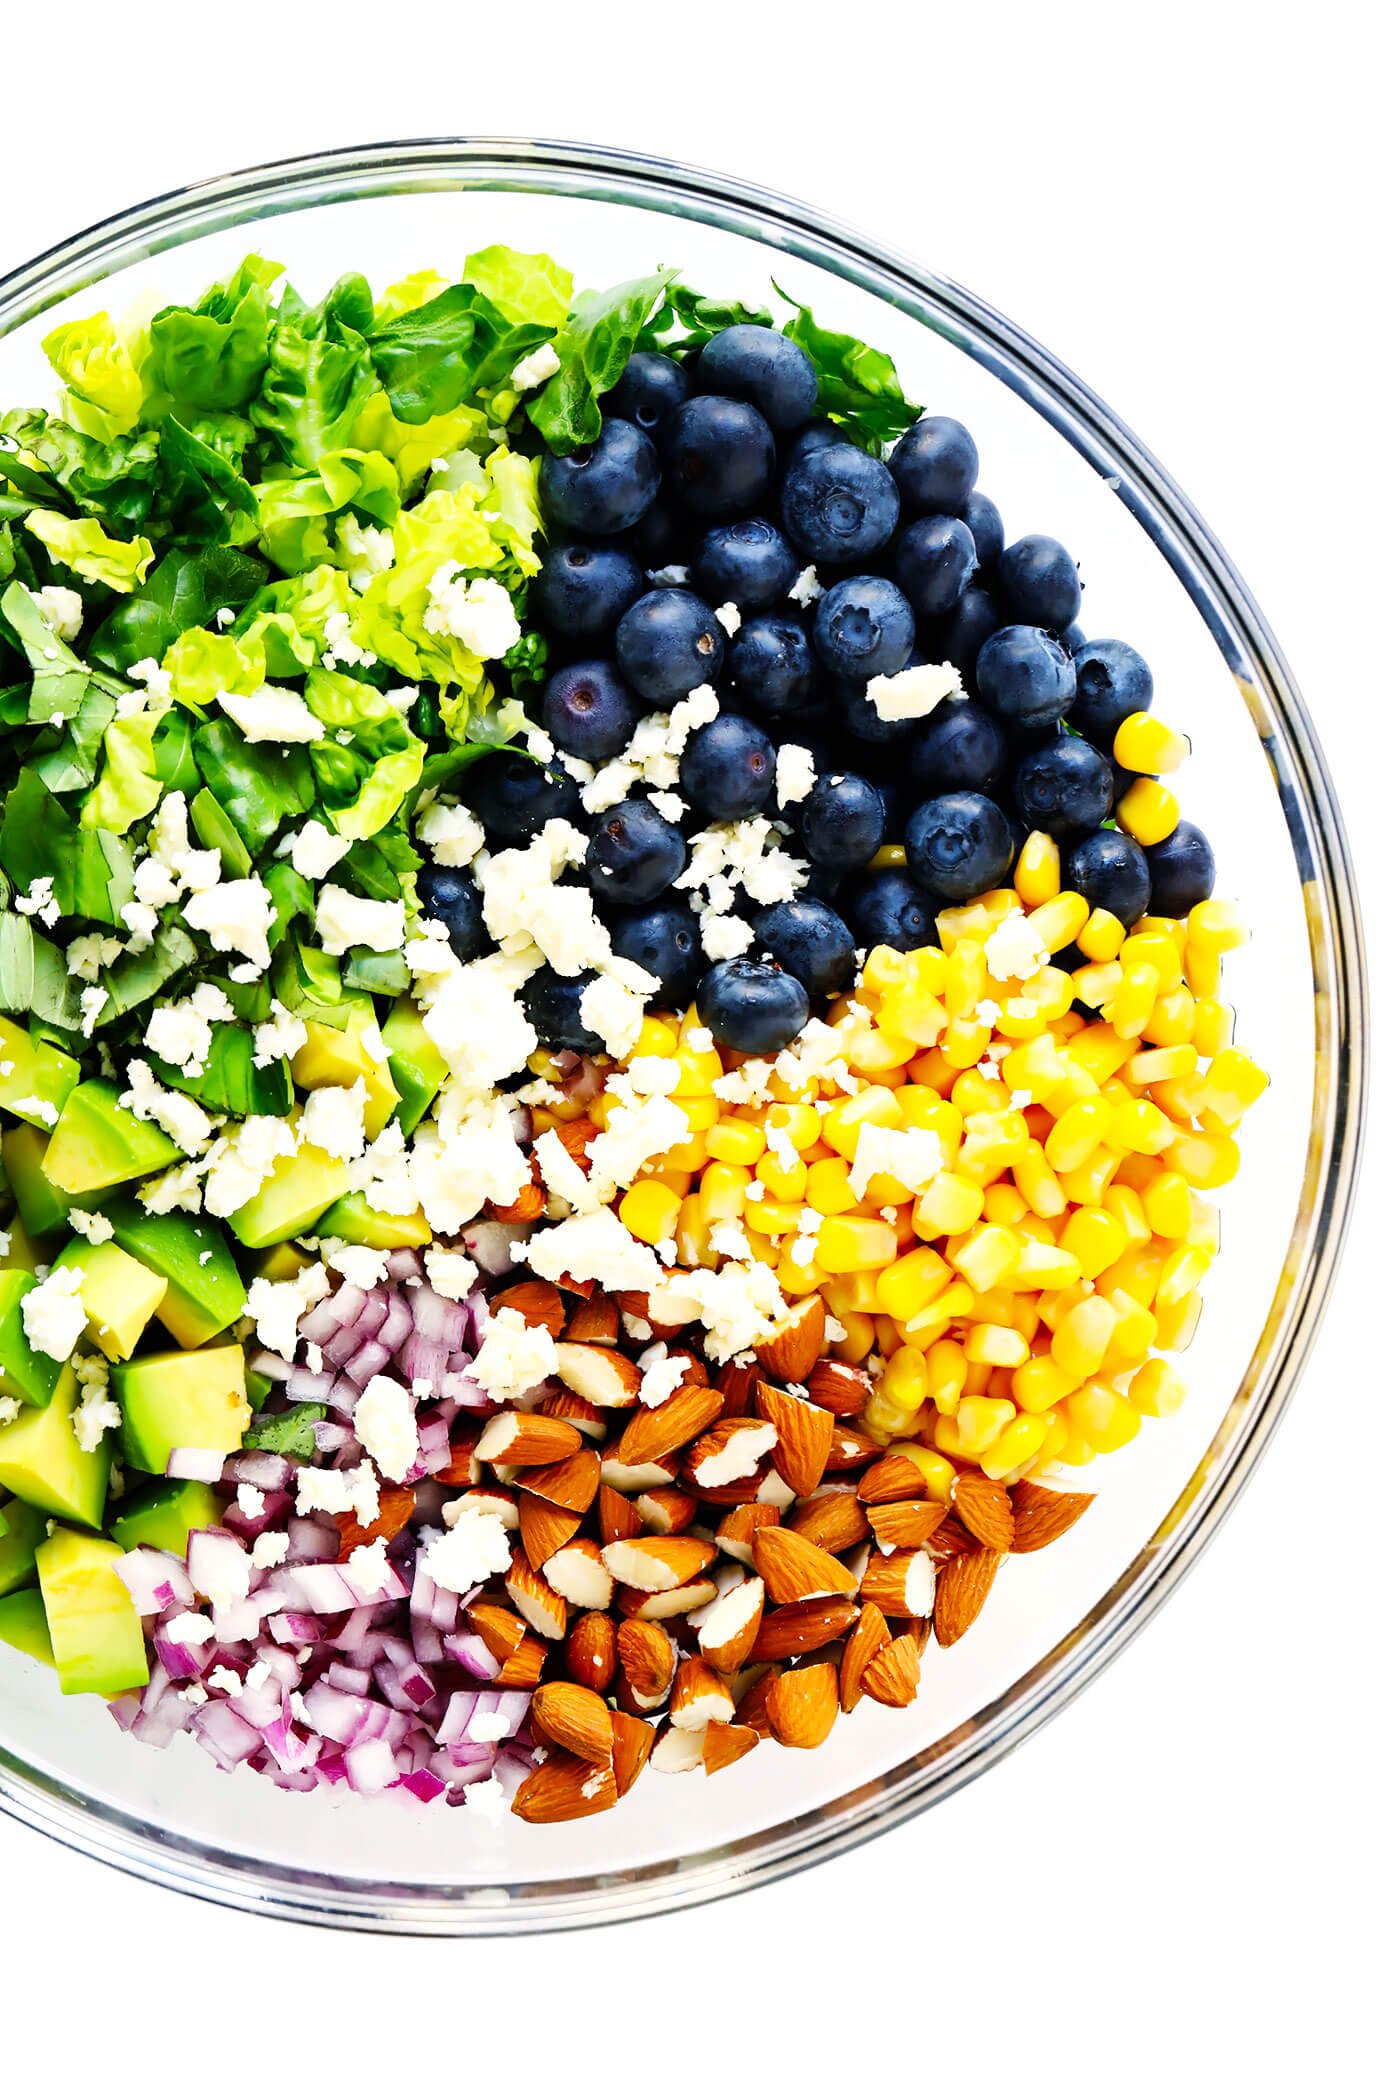 Bowl of ingredients to make blueberry corn and avocado chopped salad